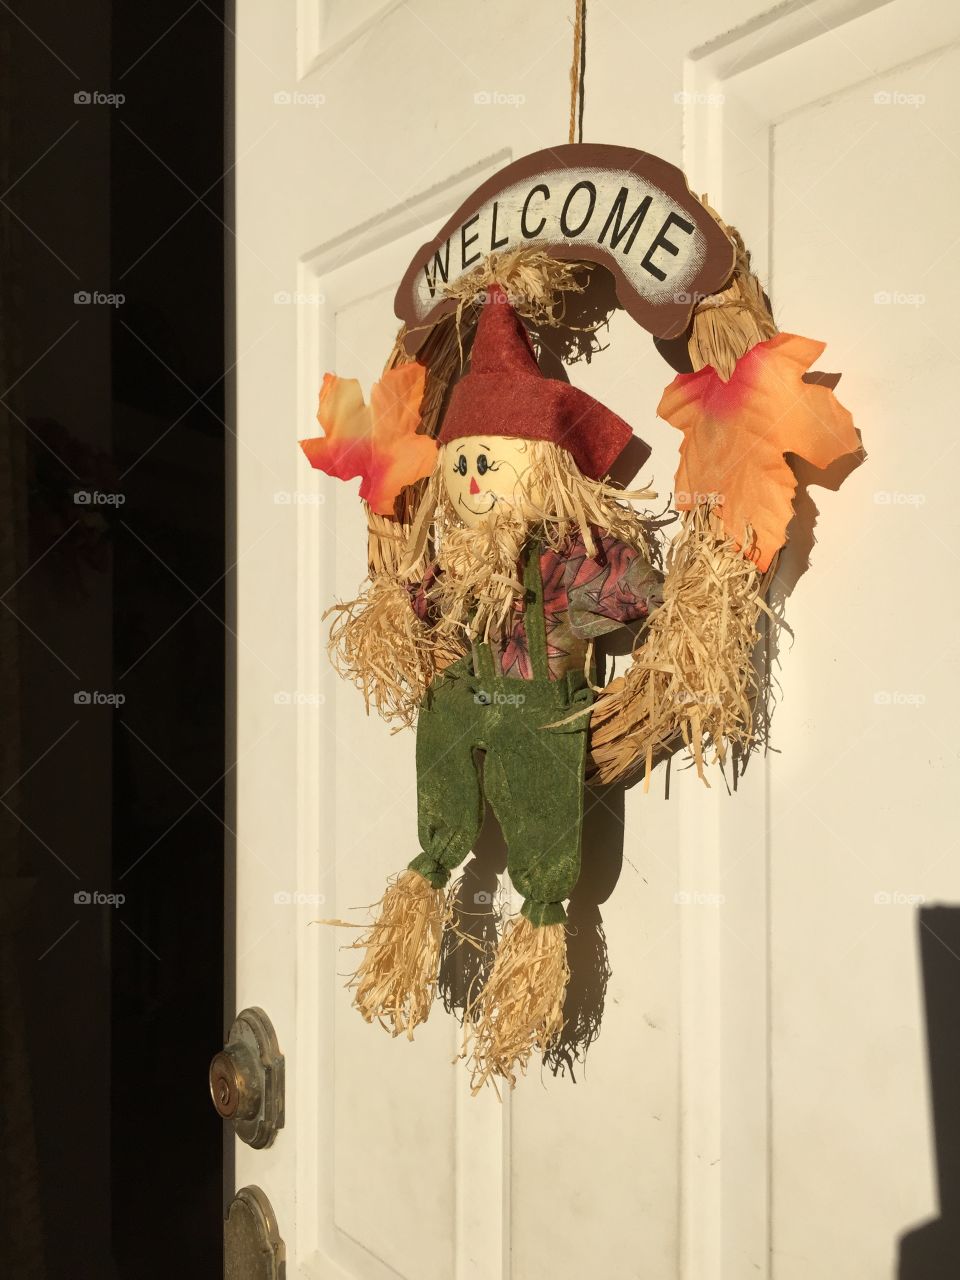 Autumn Scarecrow On Door. Seasonal Fall Scarecrow Decoration With Welcome Sign Hanging On The Front Door 